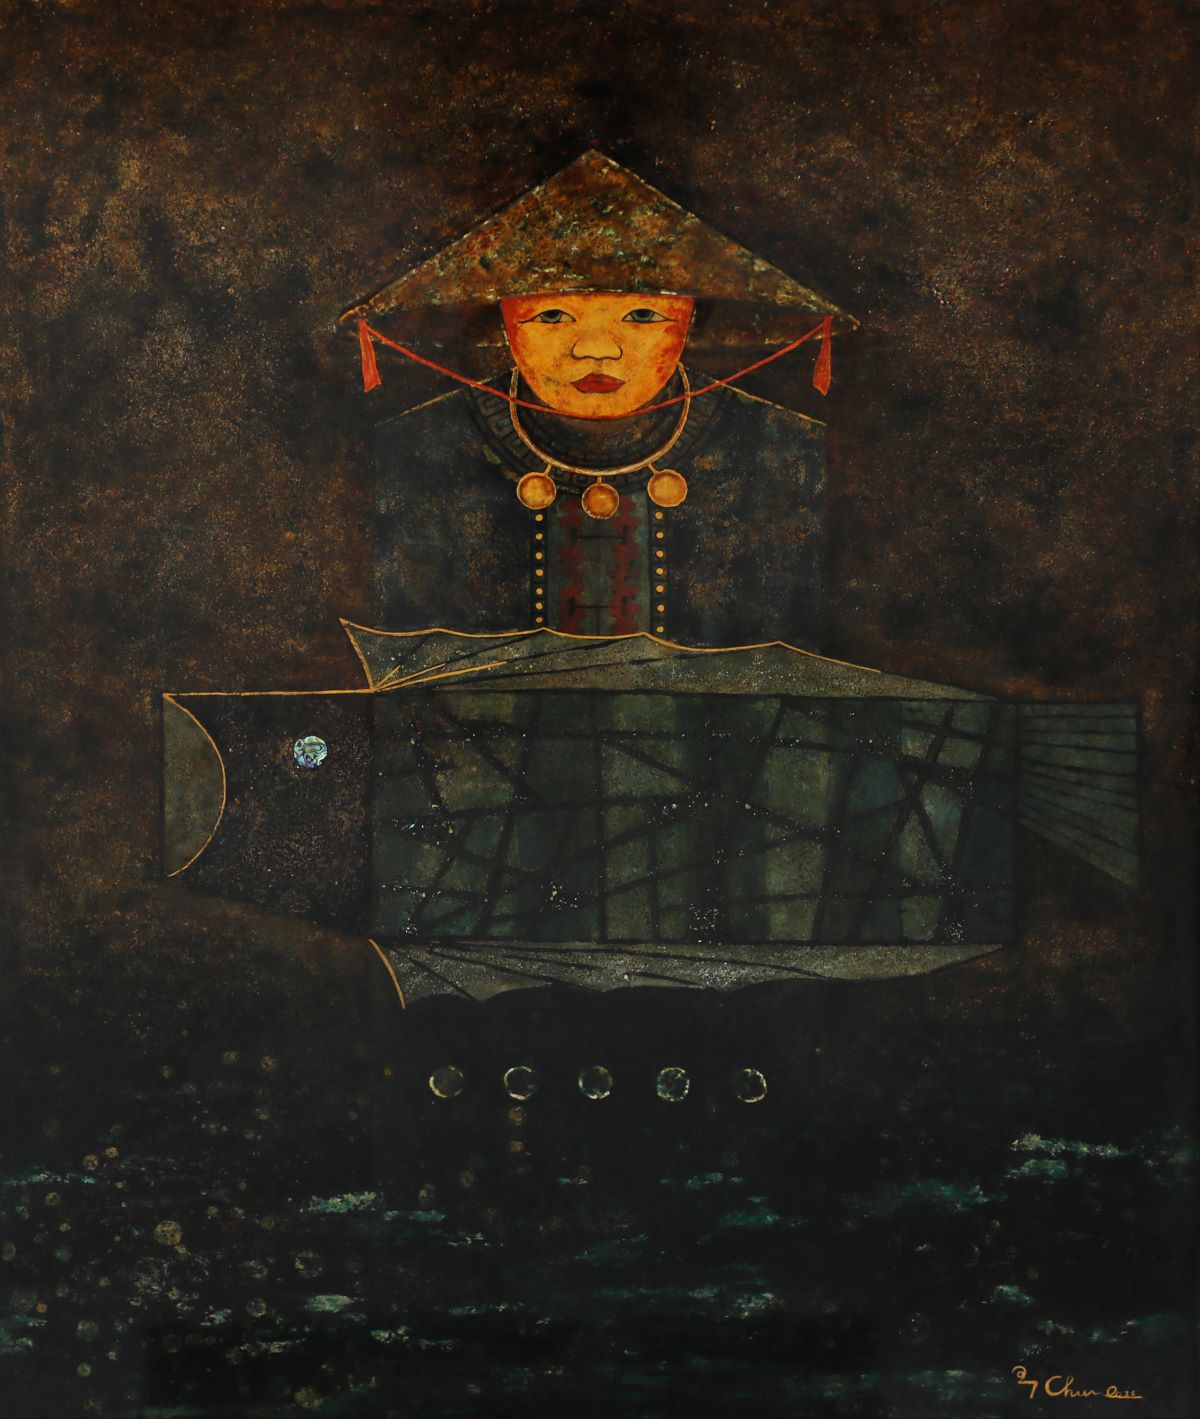 Fishing in the Moonlight - Vietnamese Lacquer Painting by Artist Nguyen Thanh Chung